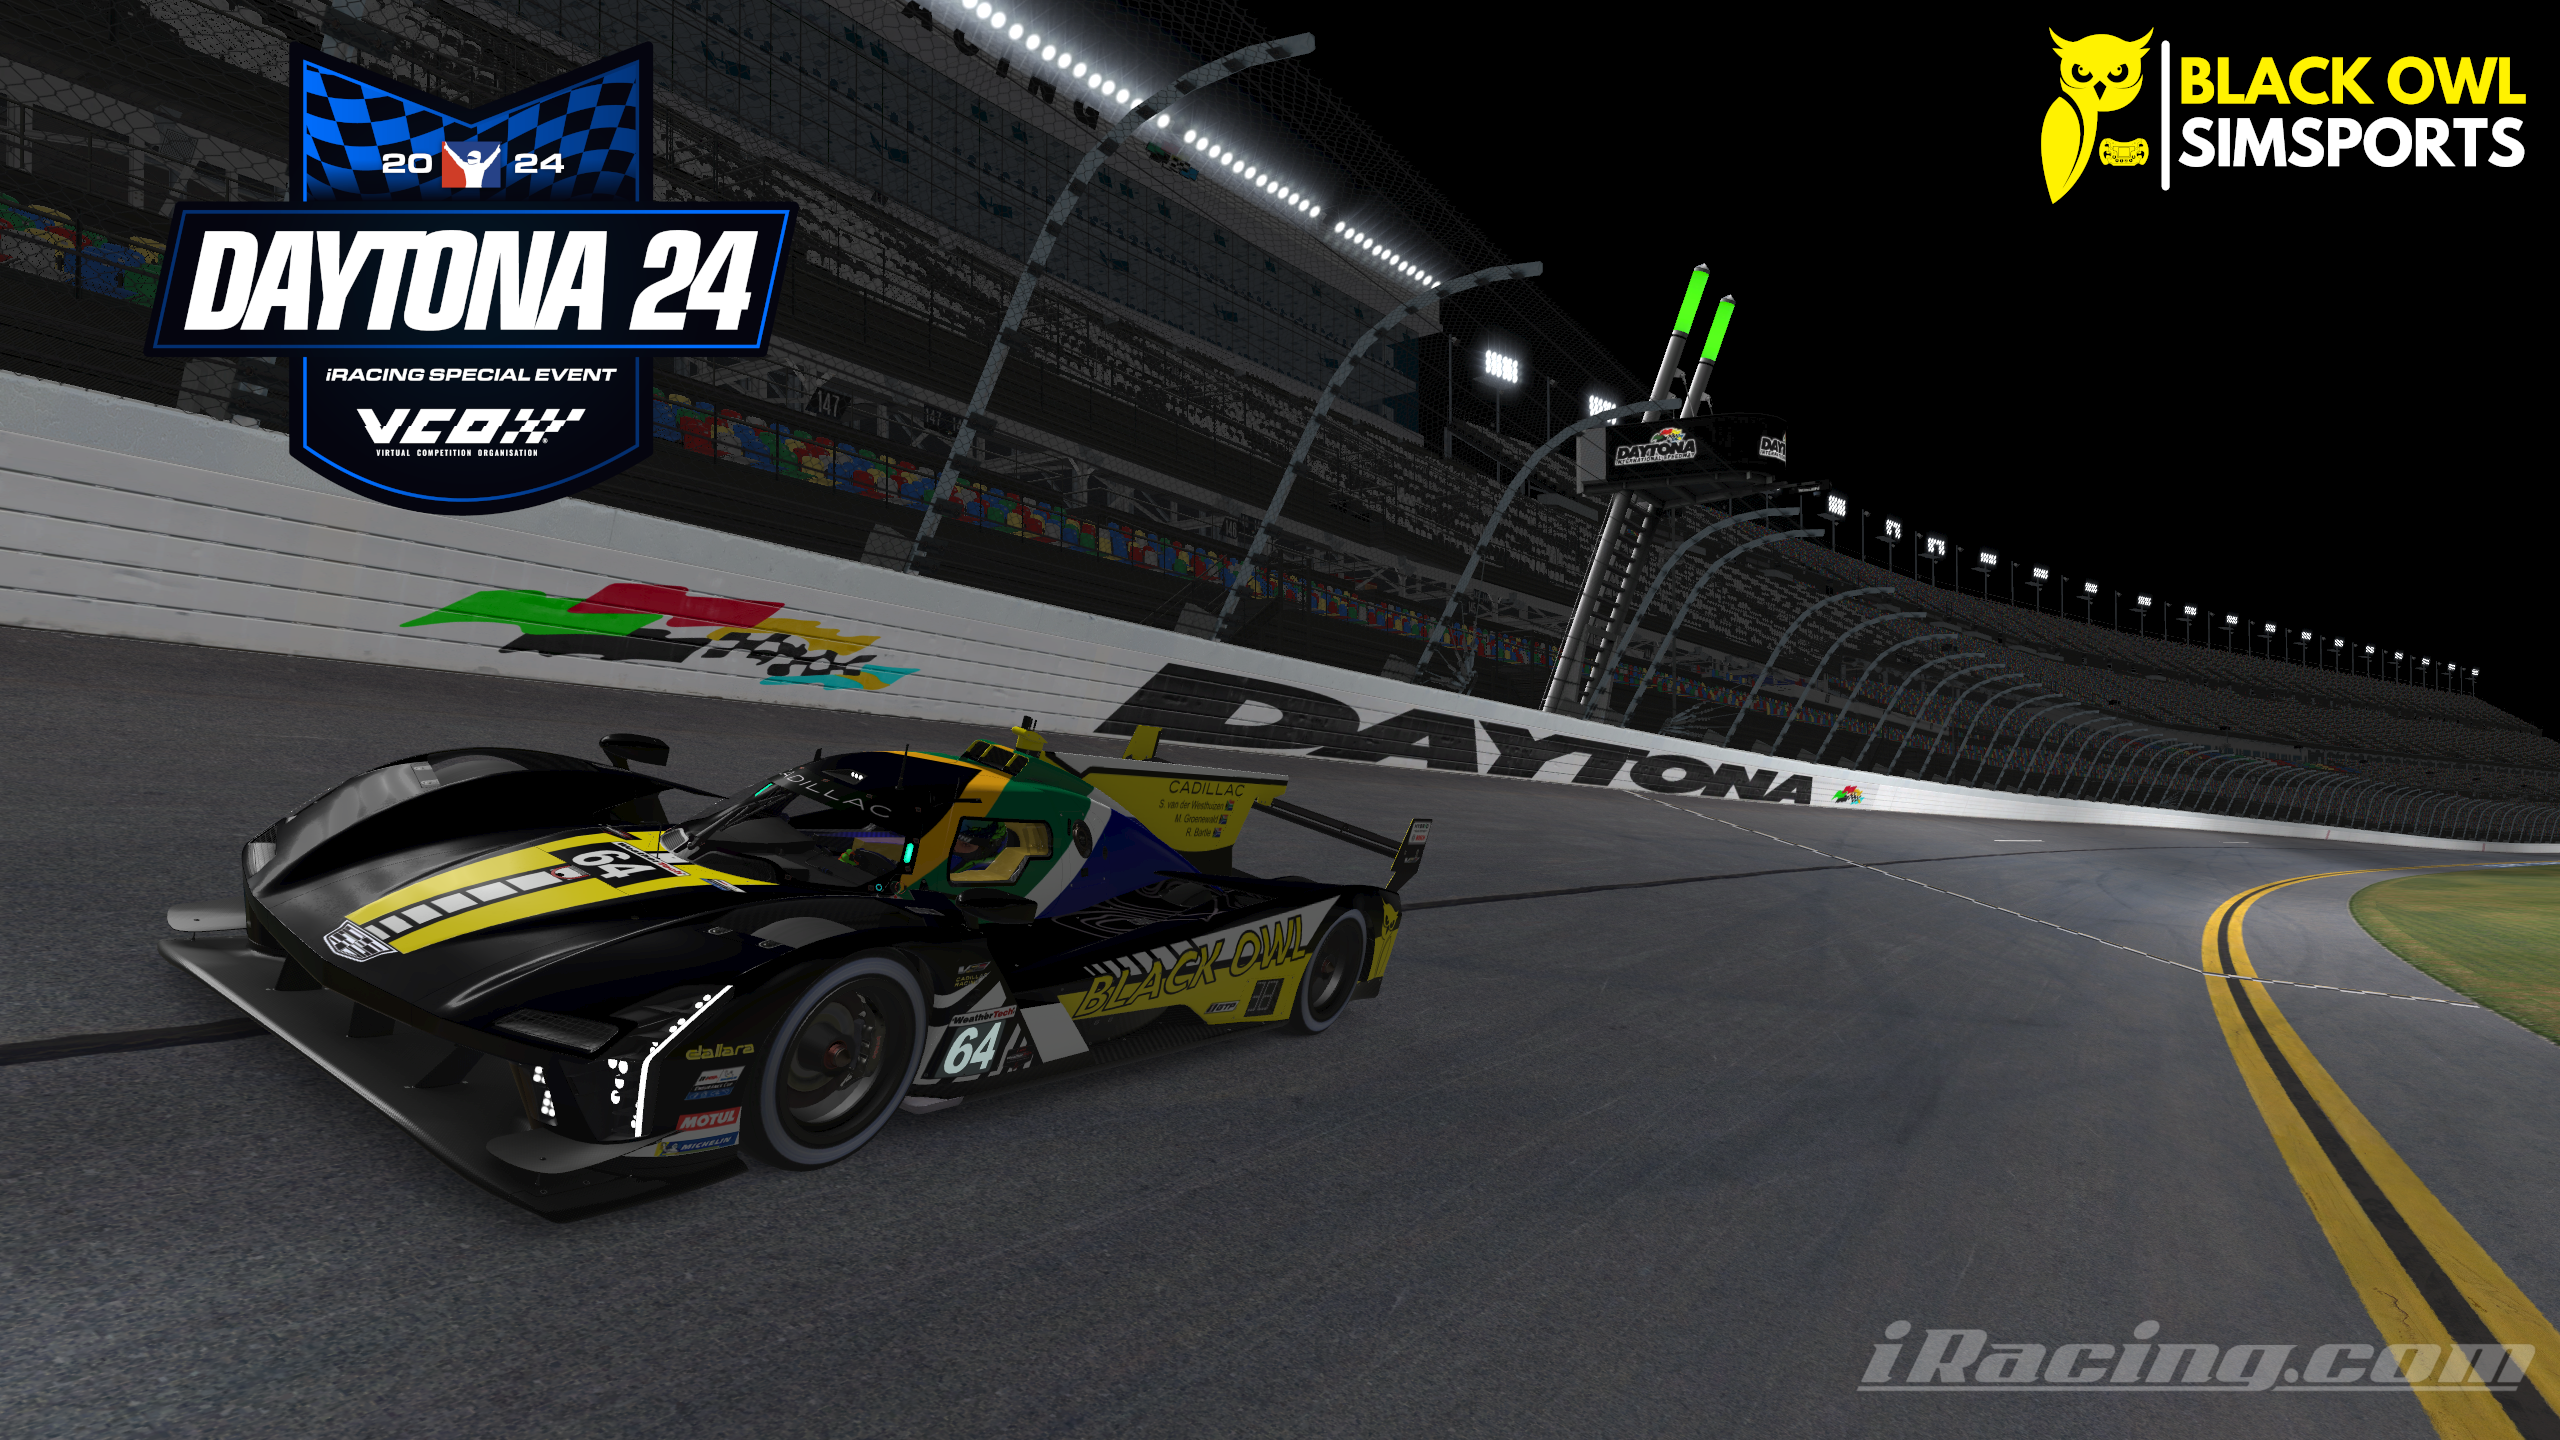 The Cadillac V-Series.R with a livery designed for Black Owl SimSports